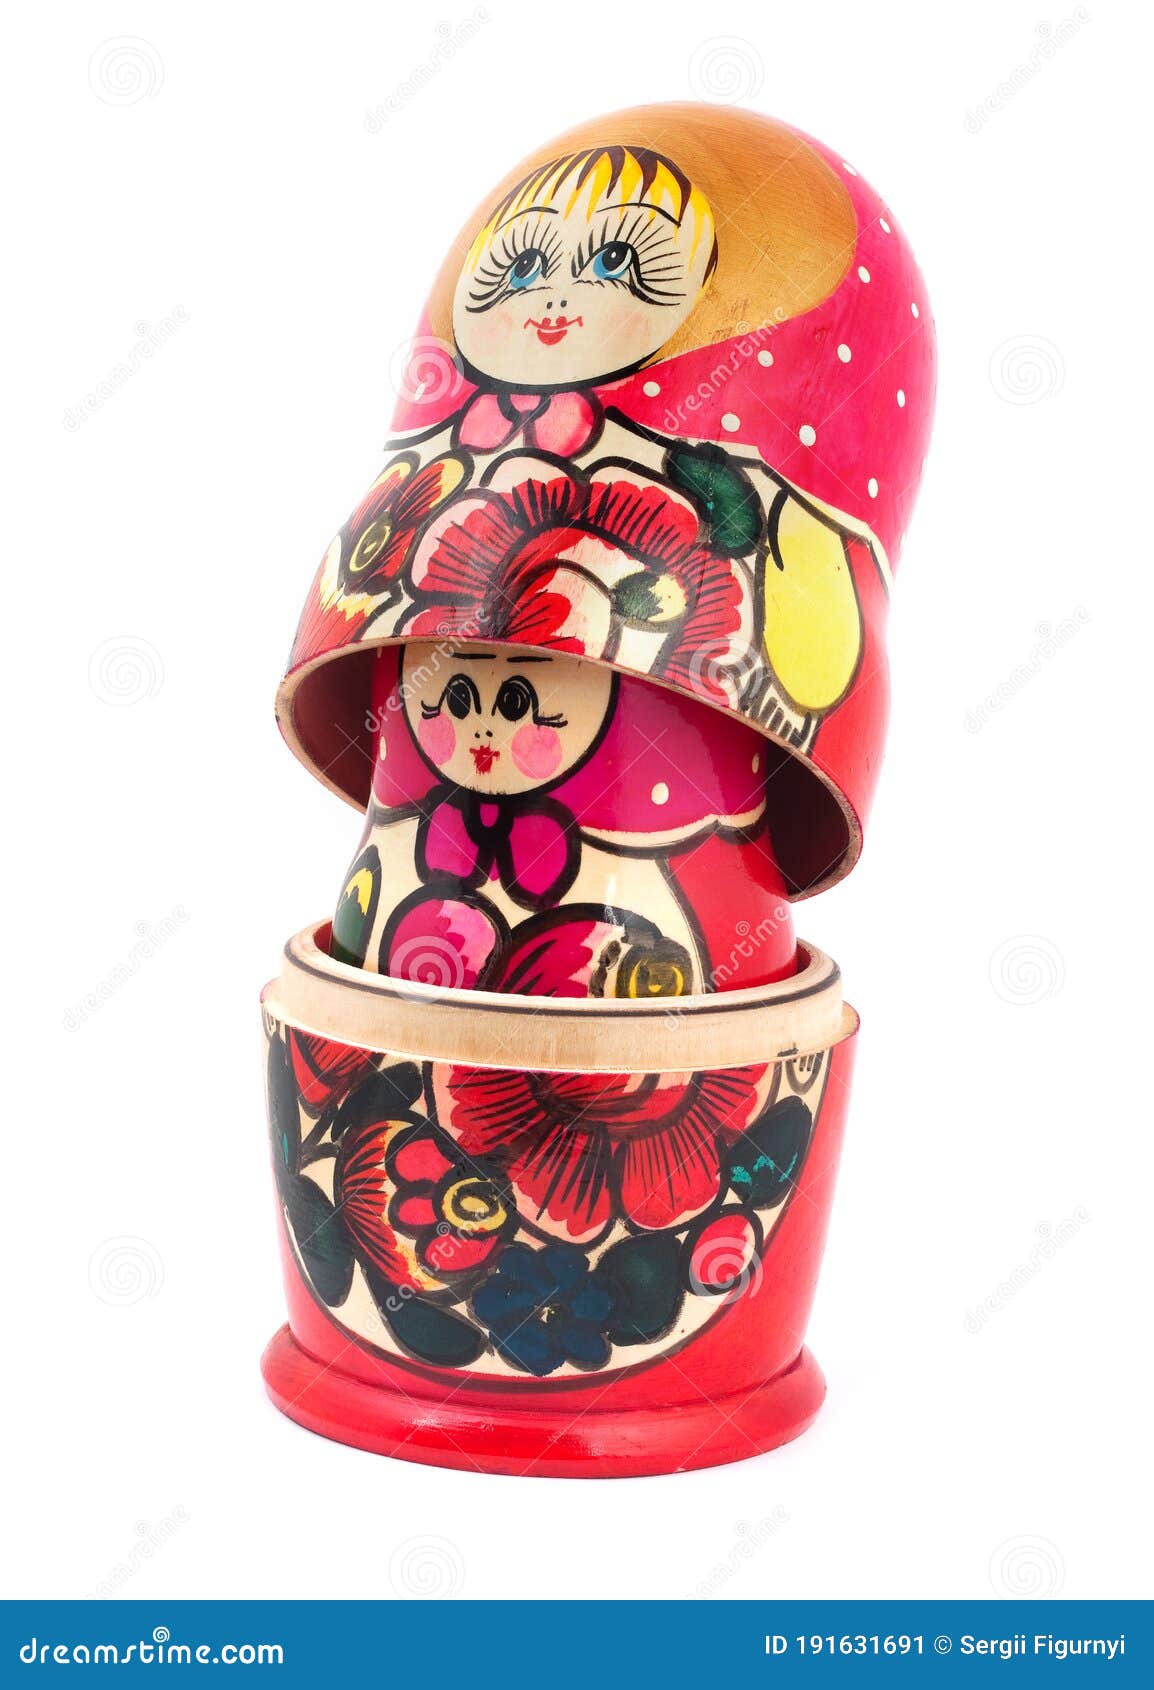 Russian Dolls Stock Image Image Of White Growth Collection 191631691